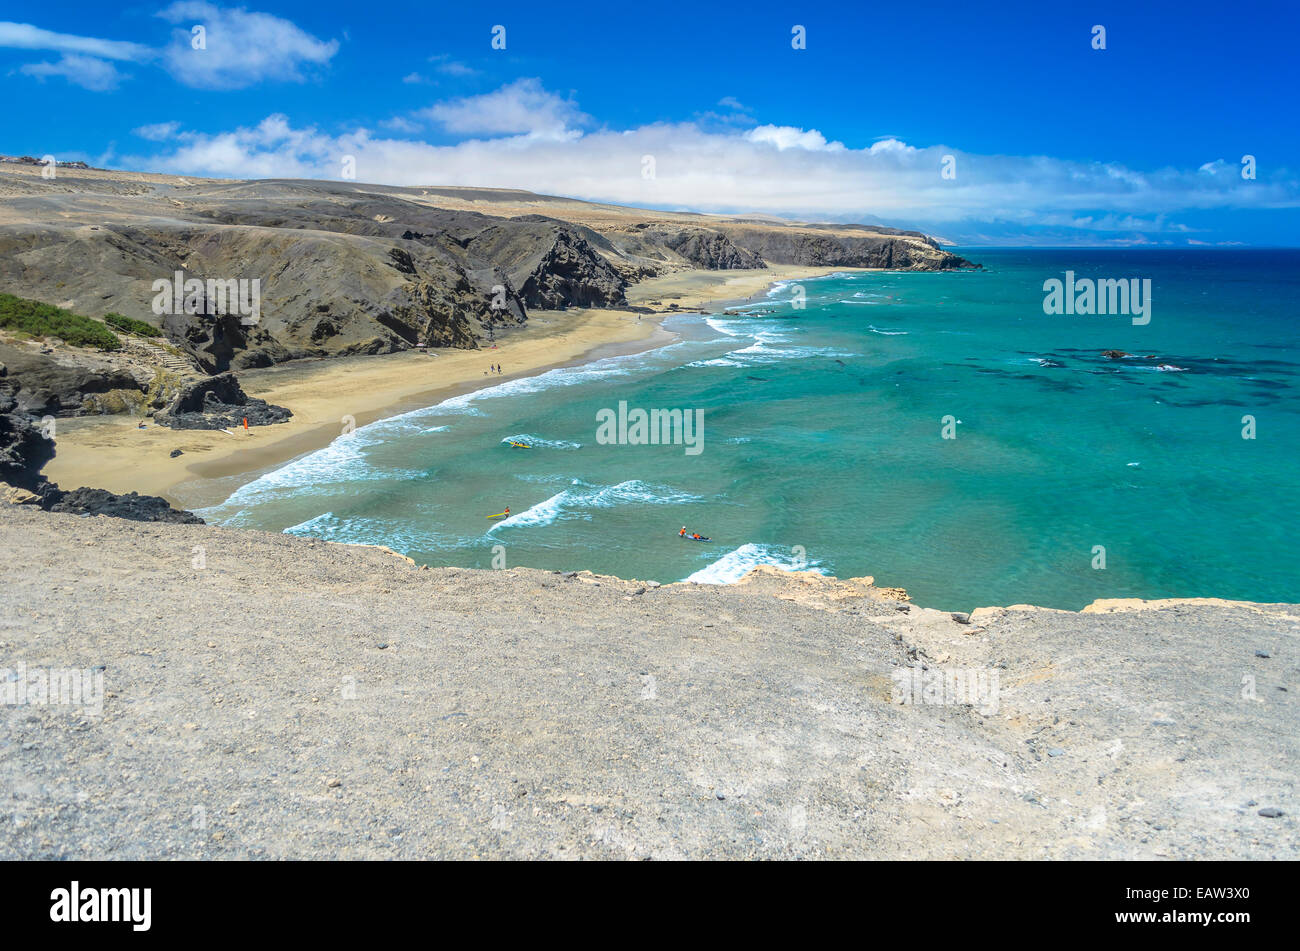 Aerial View of a Beach in Fuerteventura, Canary Islands, Spain Stock Photo